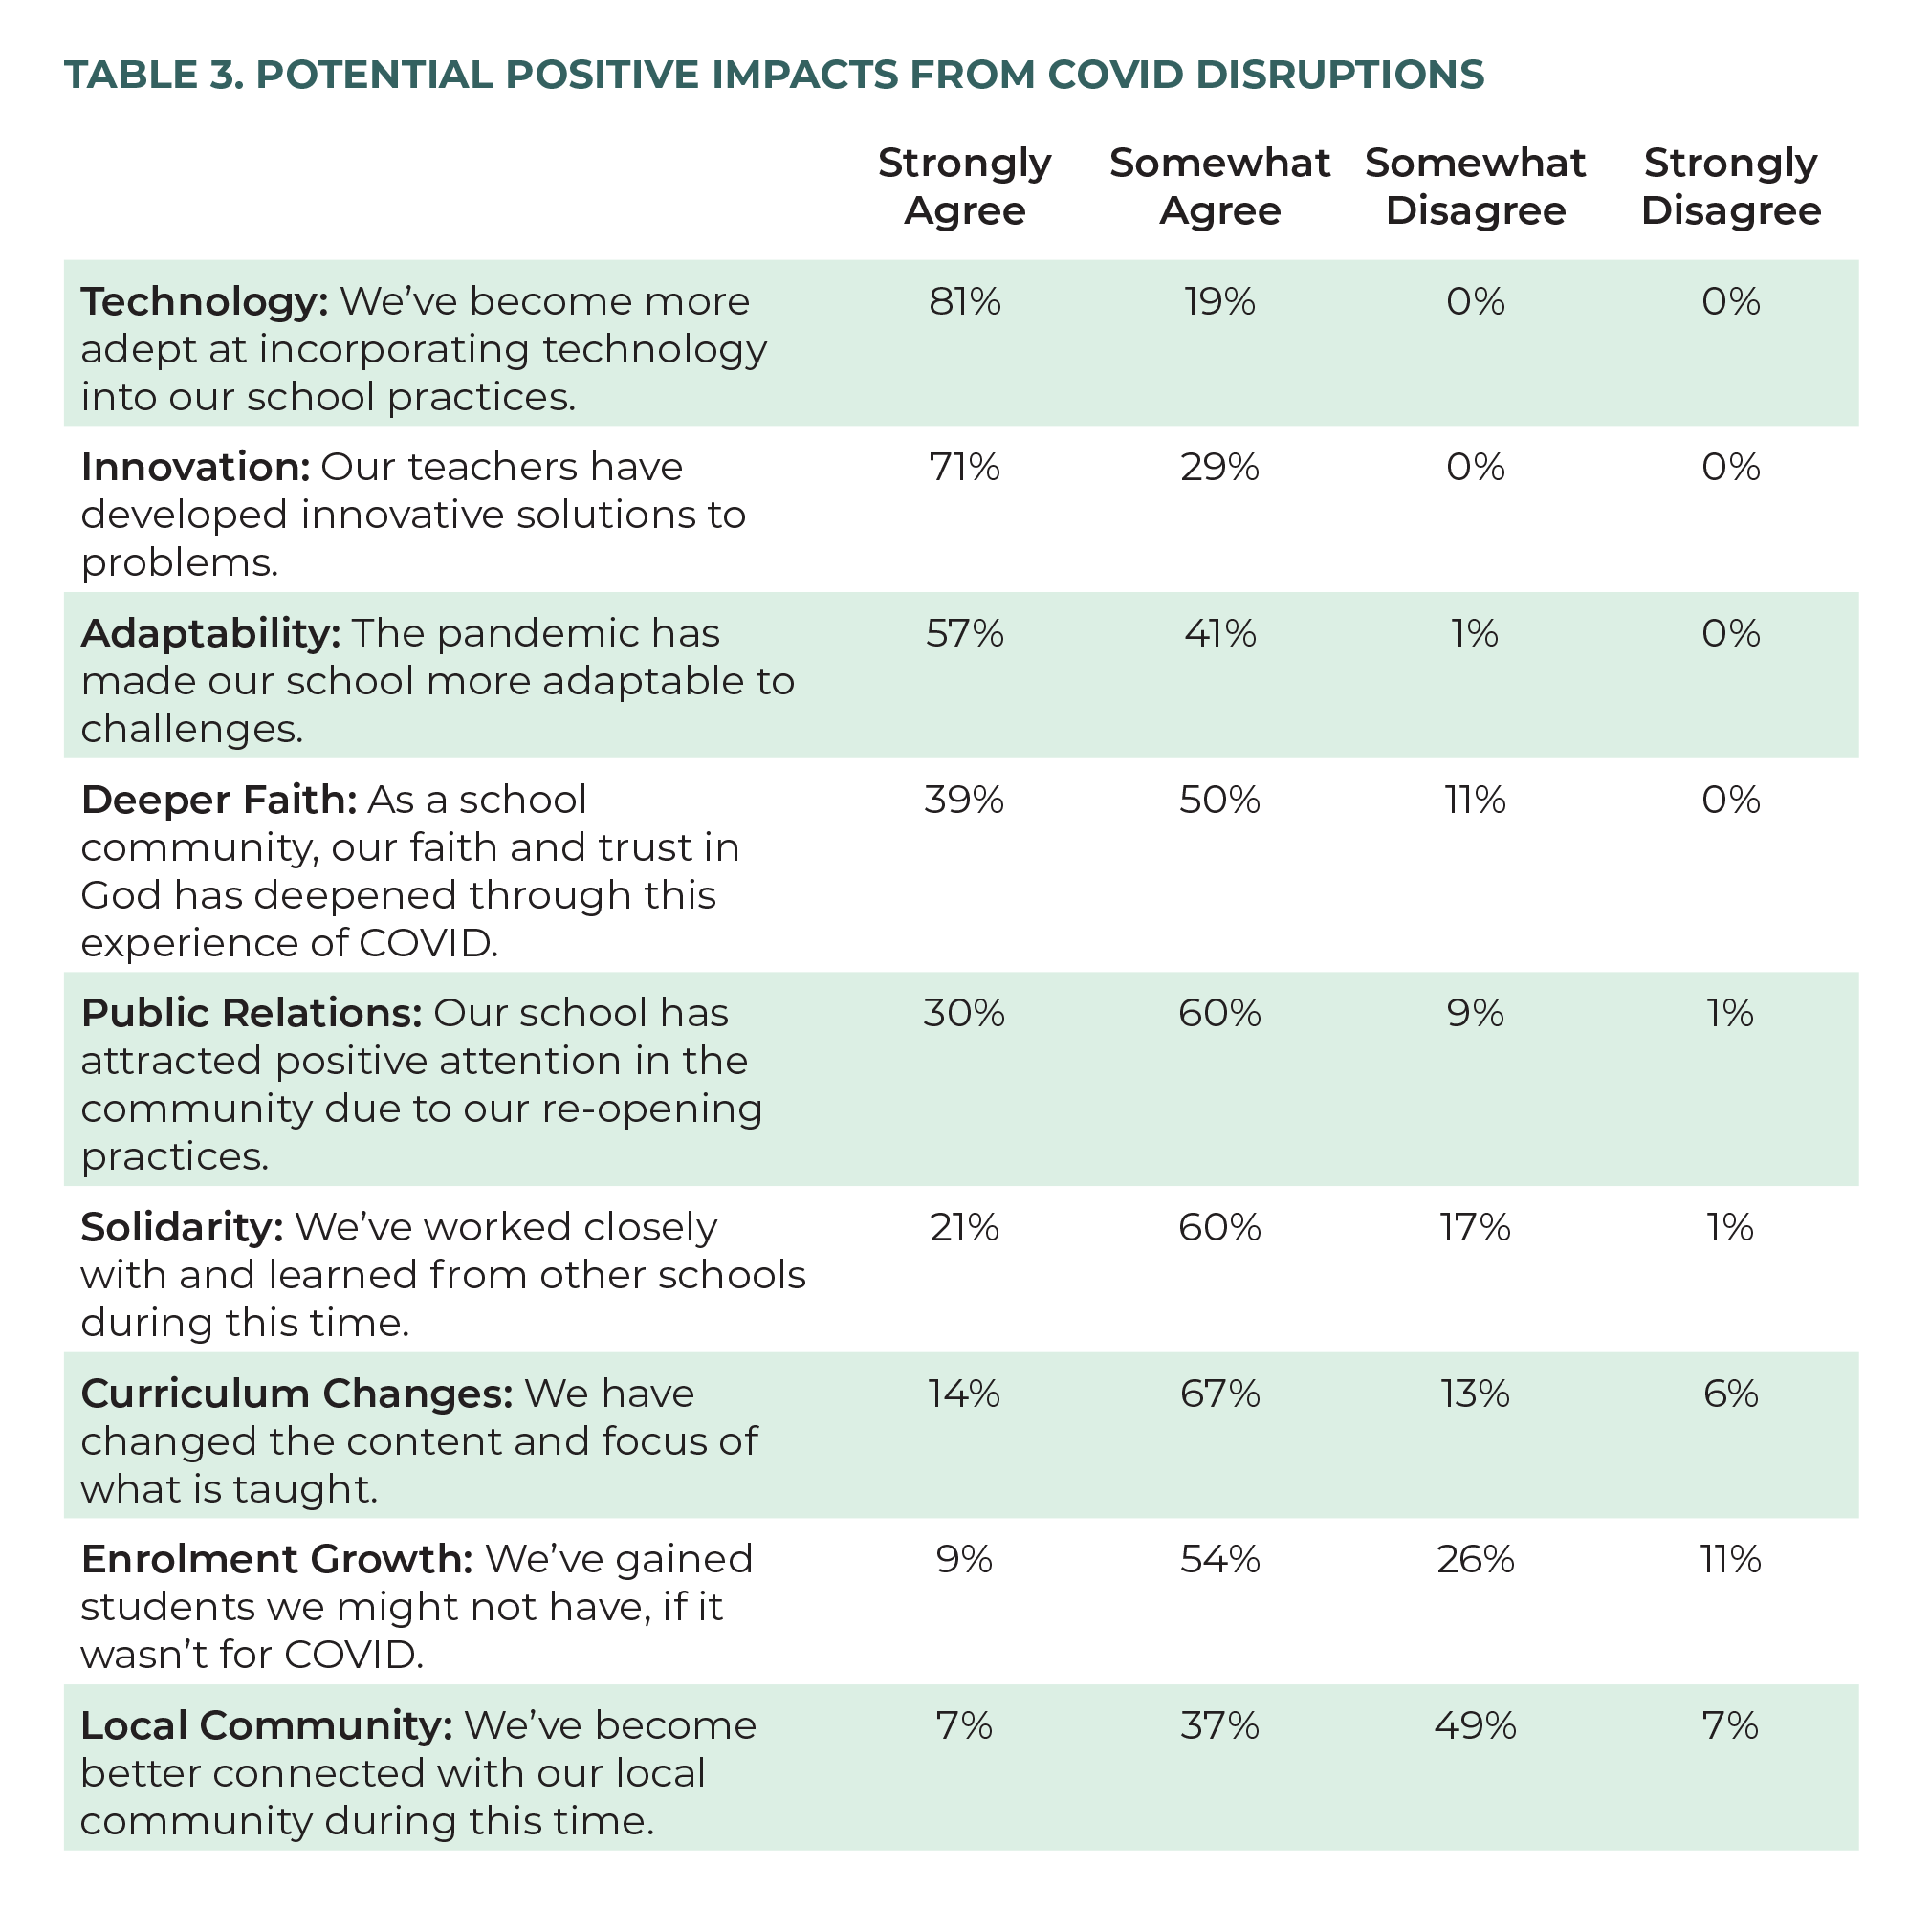 Table 3. Potential Positive Impacts from COVID Disruptions.